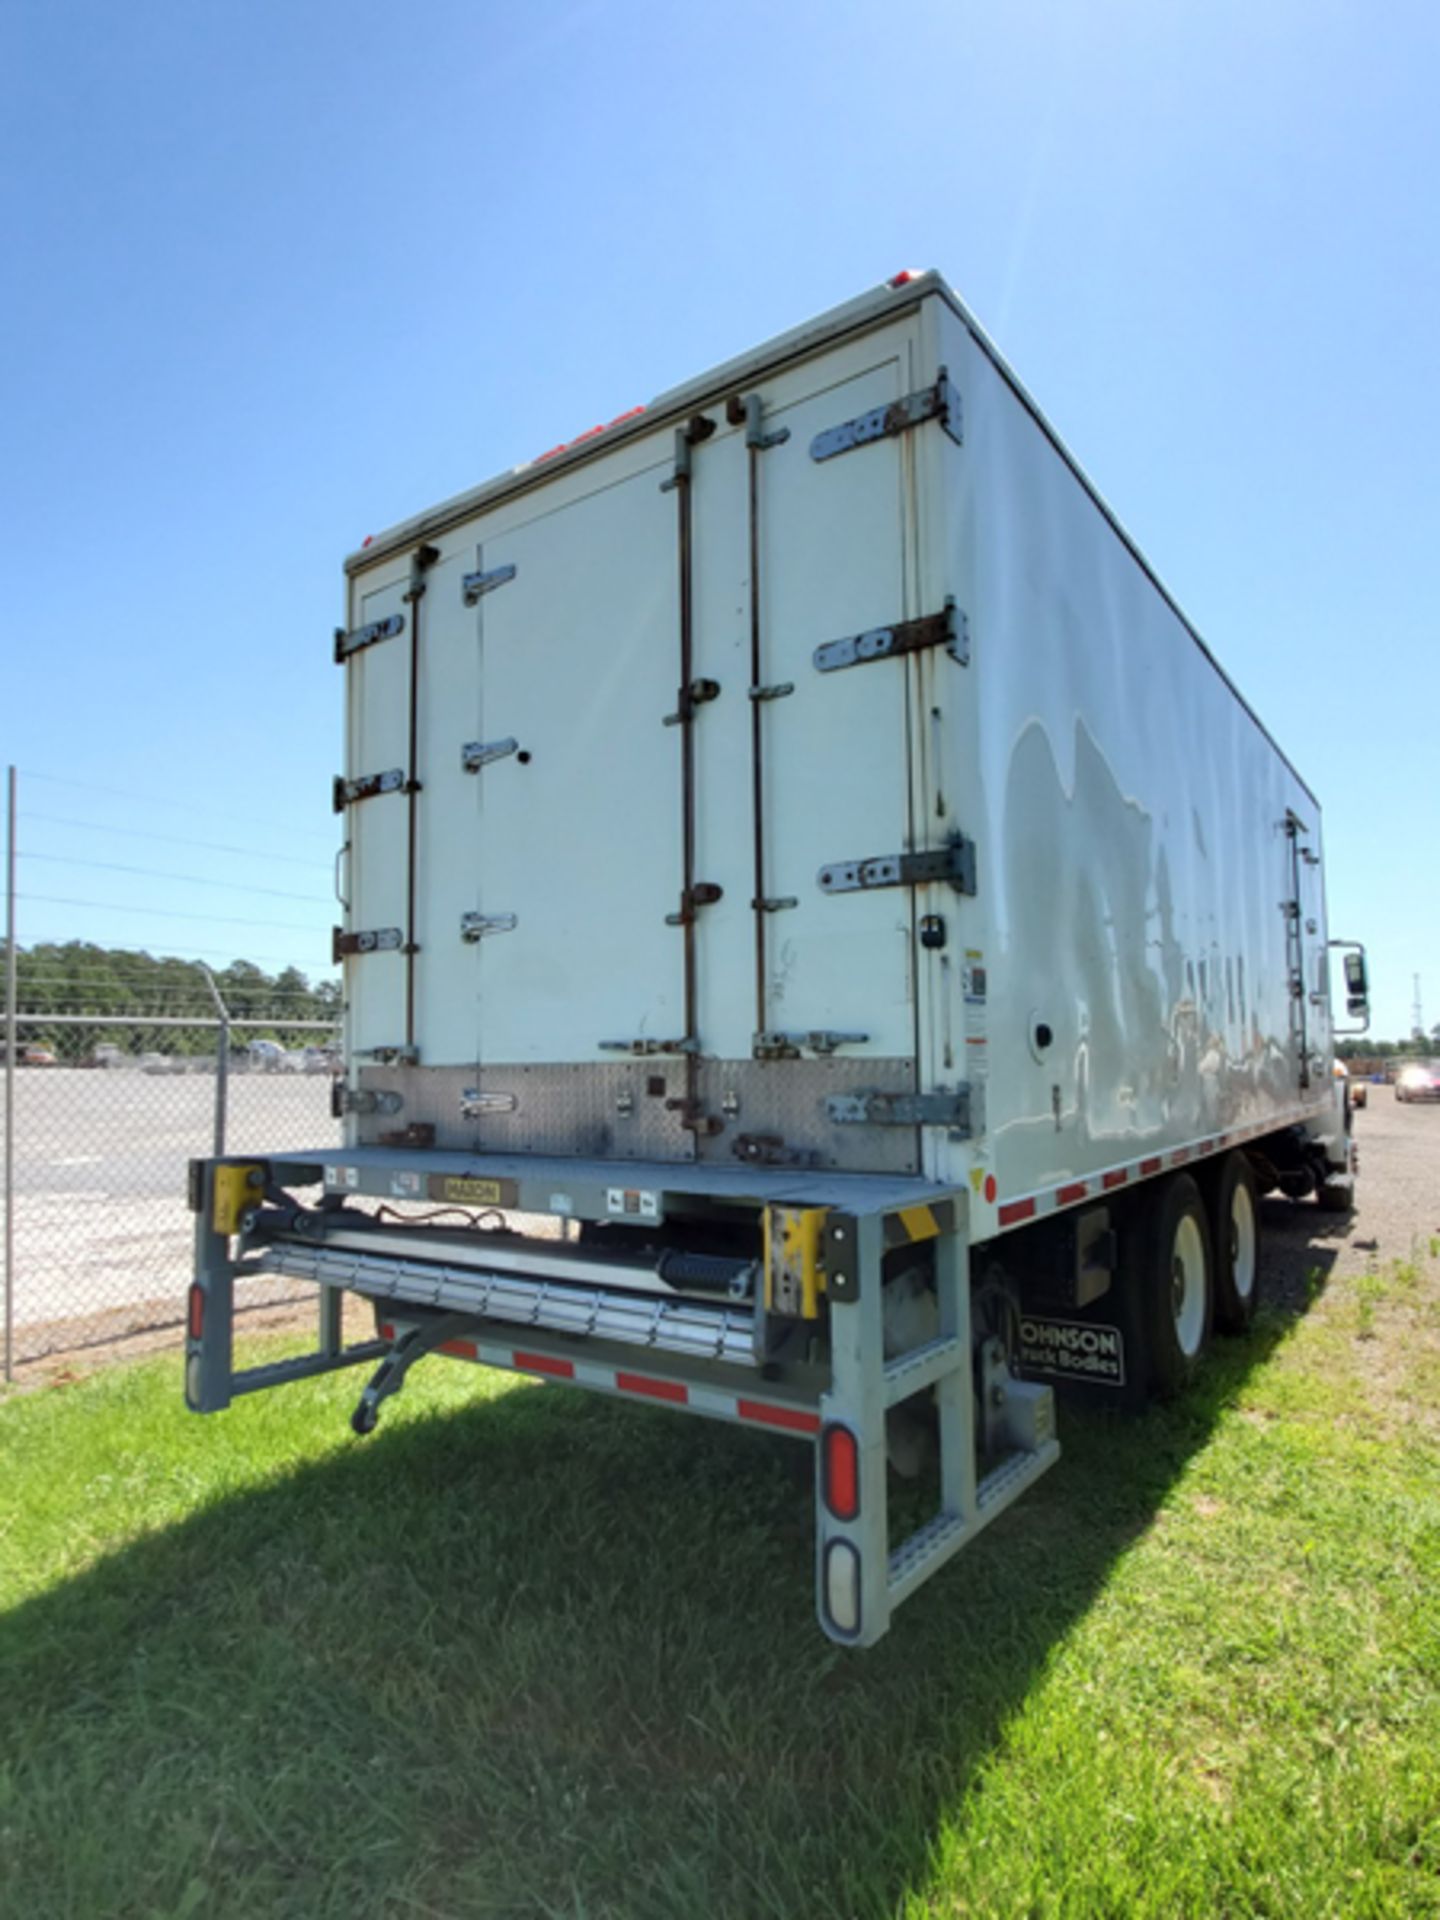 2018 INTERNATIONAL 4400 SBA 6X4 REFRIGERATED BOX TRUCK VIN#: 1HTMSTAR0JH529741, Approx Miles: 40450, - Image 3 of 9